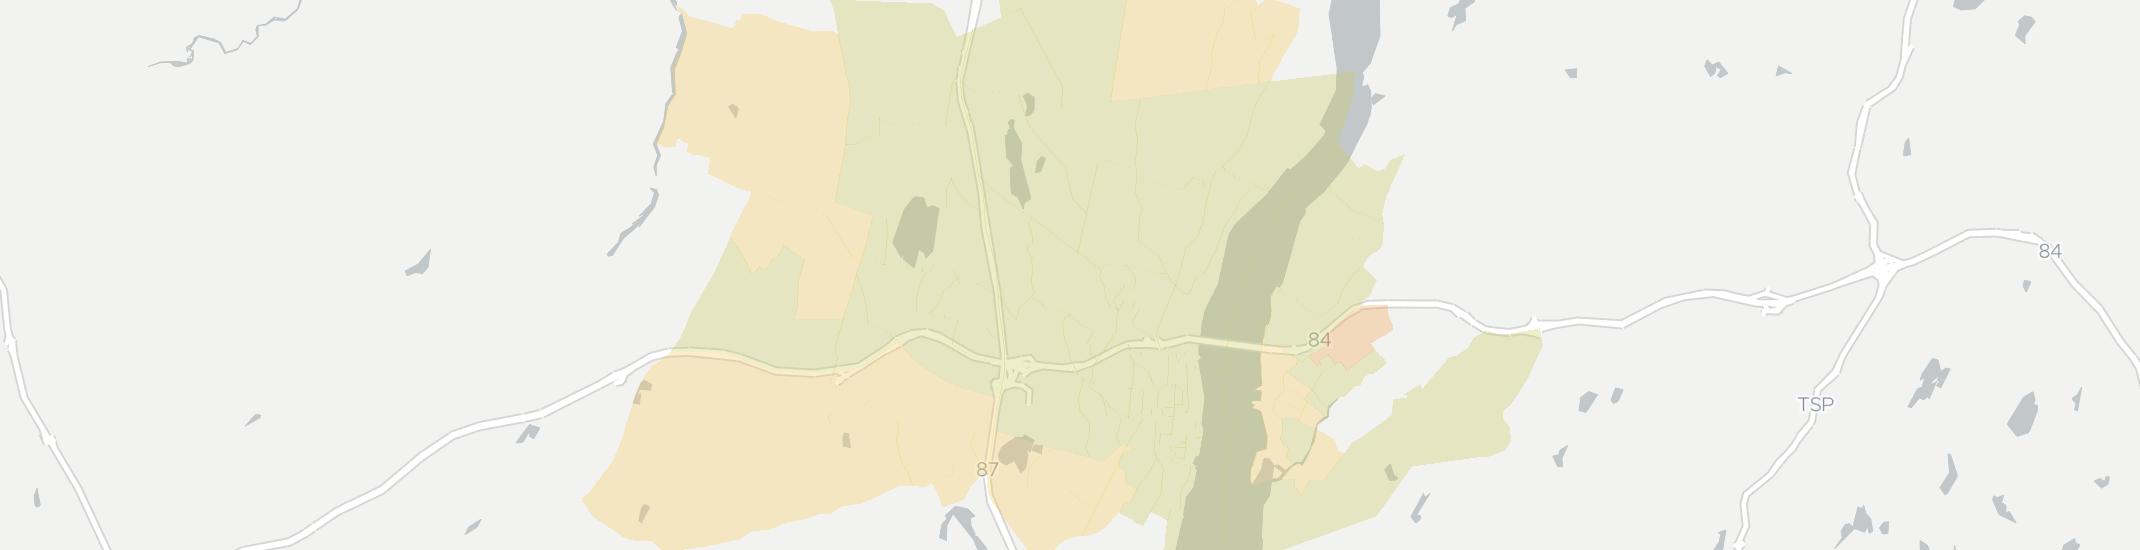 Newburgh Internet Competition Map. Click for interactive map